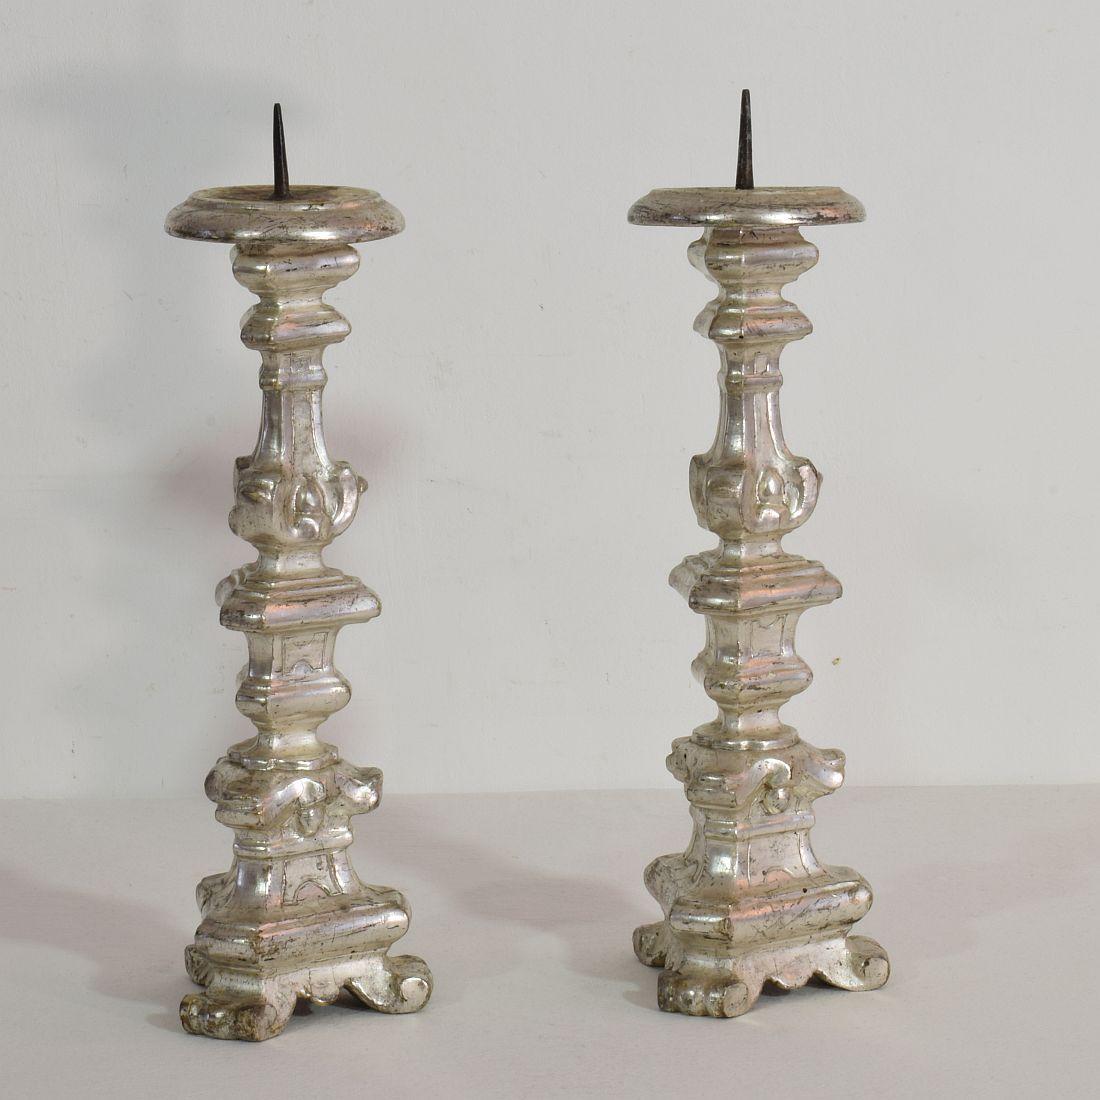 Wood Couple of 18th Century Italian Baroque Silvered Candlesticks